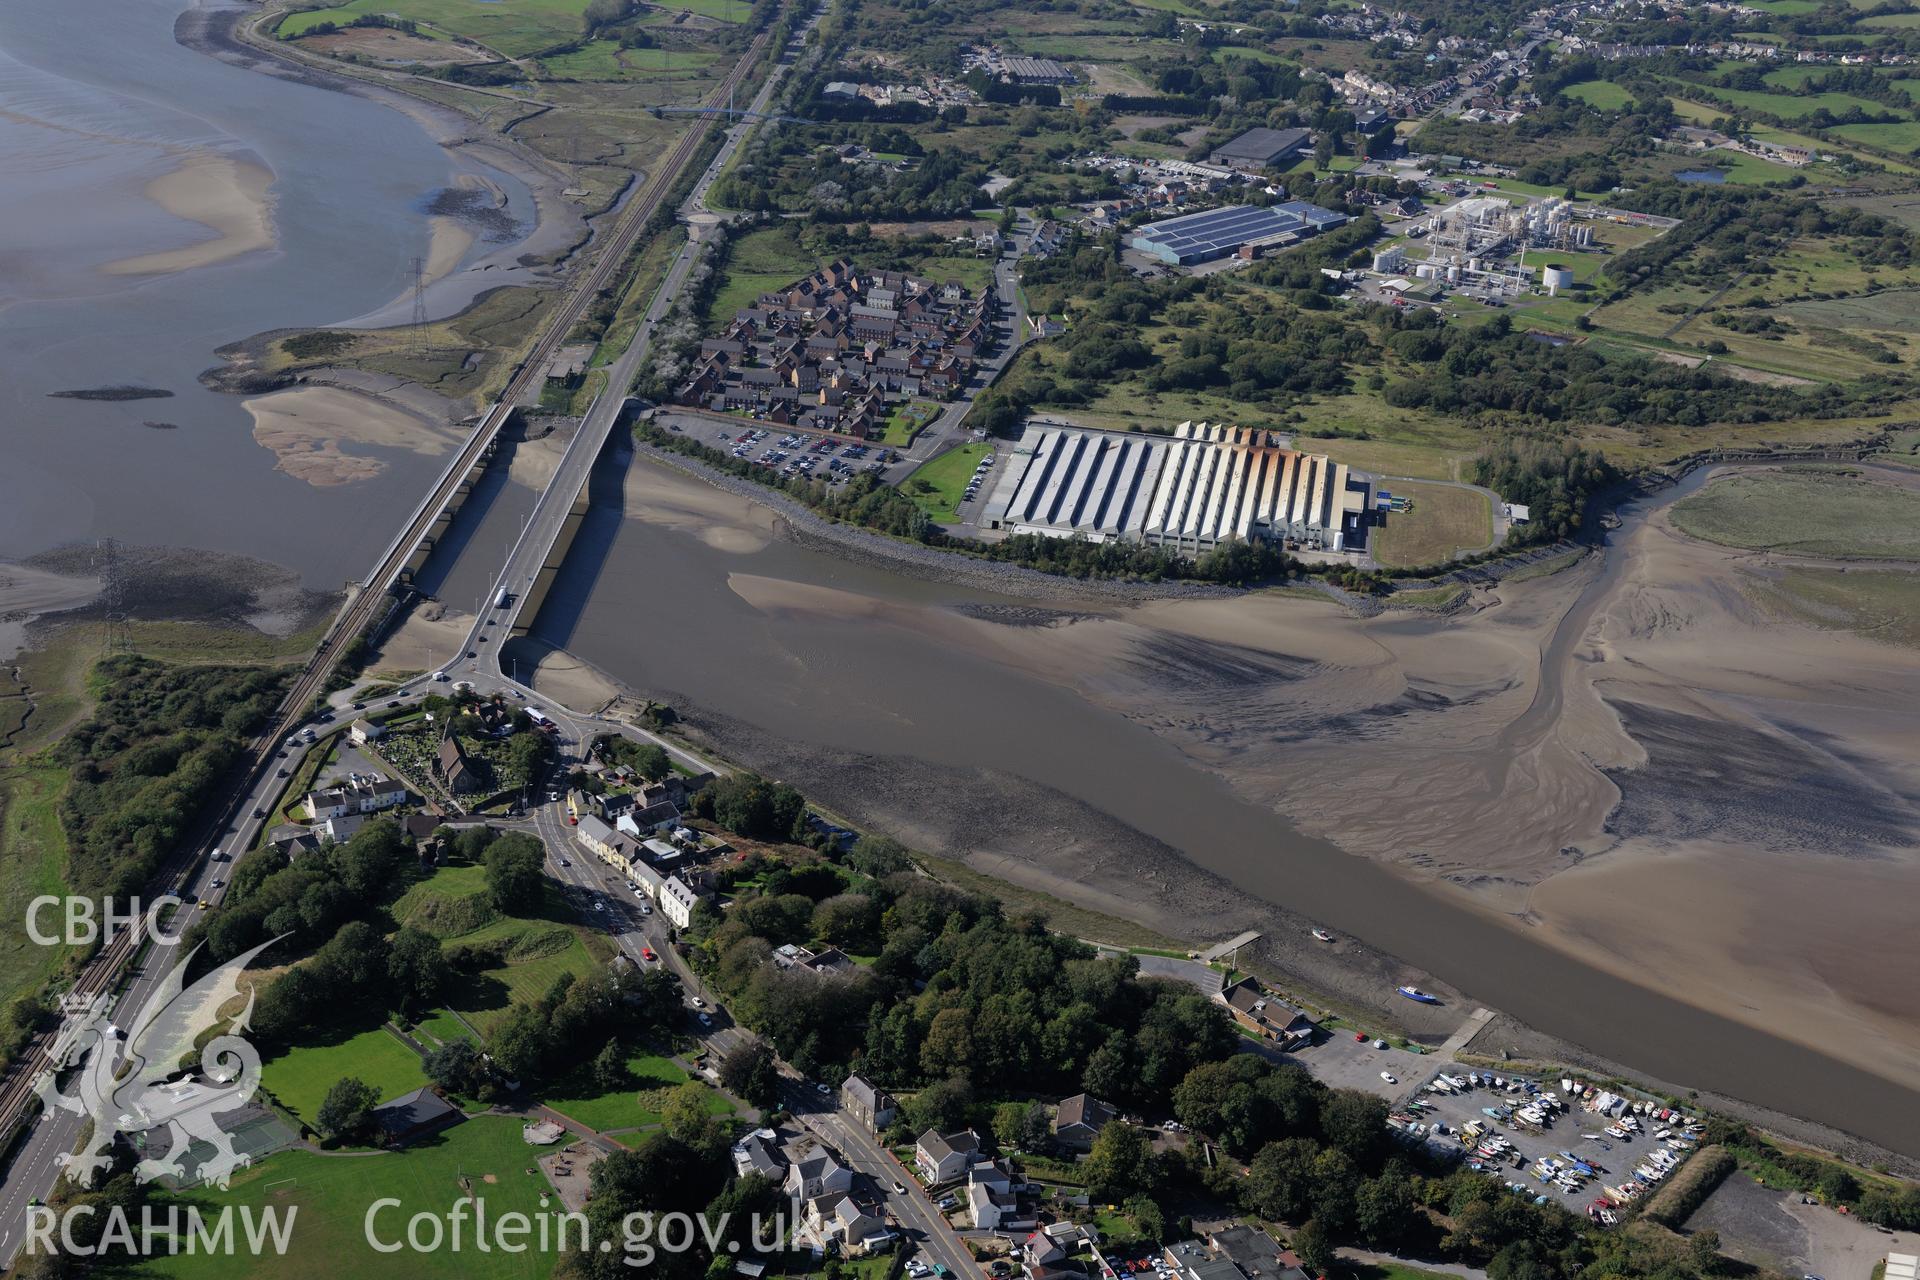 St. Michael's church and Loughor Castle; railway viaduct; road bridge; Roman Fort and Yspytty tin plate works, Loughor, between Llanelli and Swansea. Oblique aerial photograph taken during the Royal Commission's programme of archaeological aerial reconnaissance by Toby Driver on 30th September 2015.